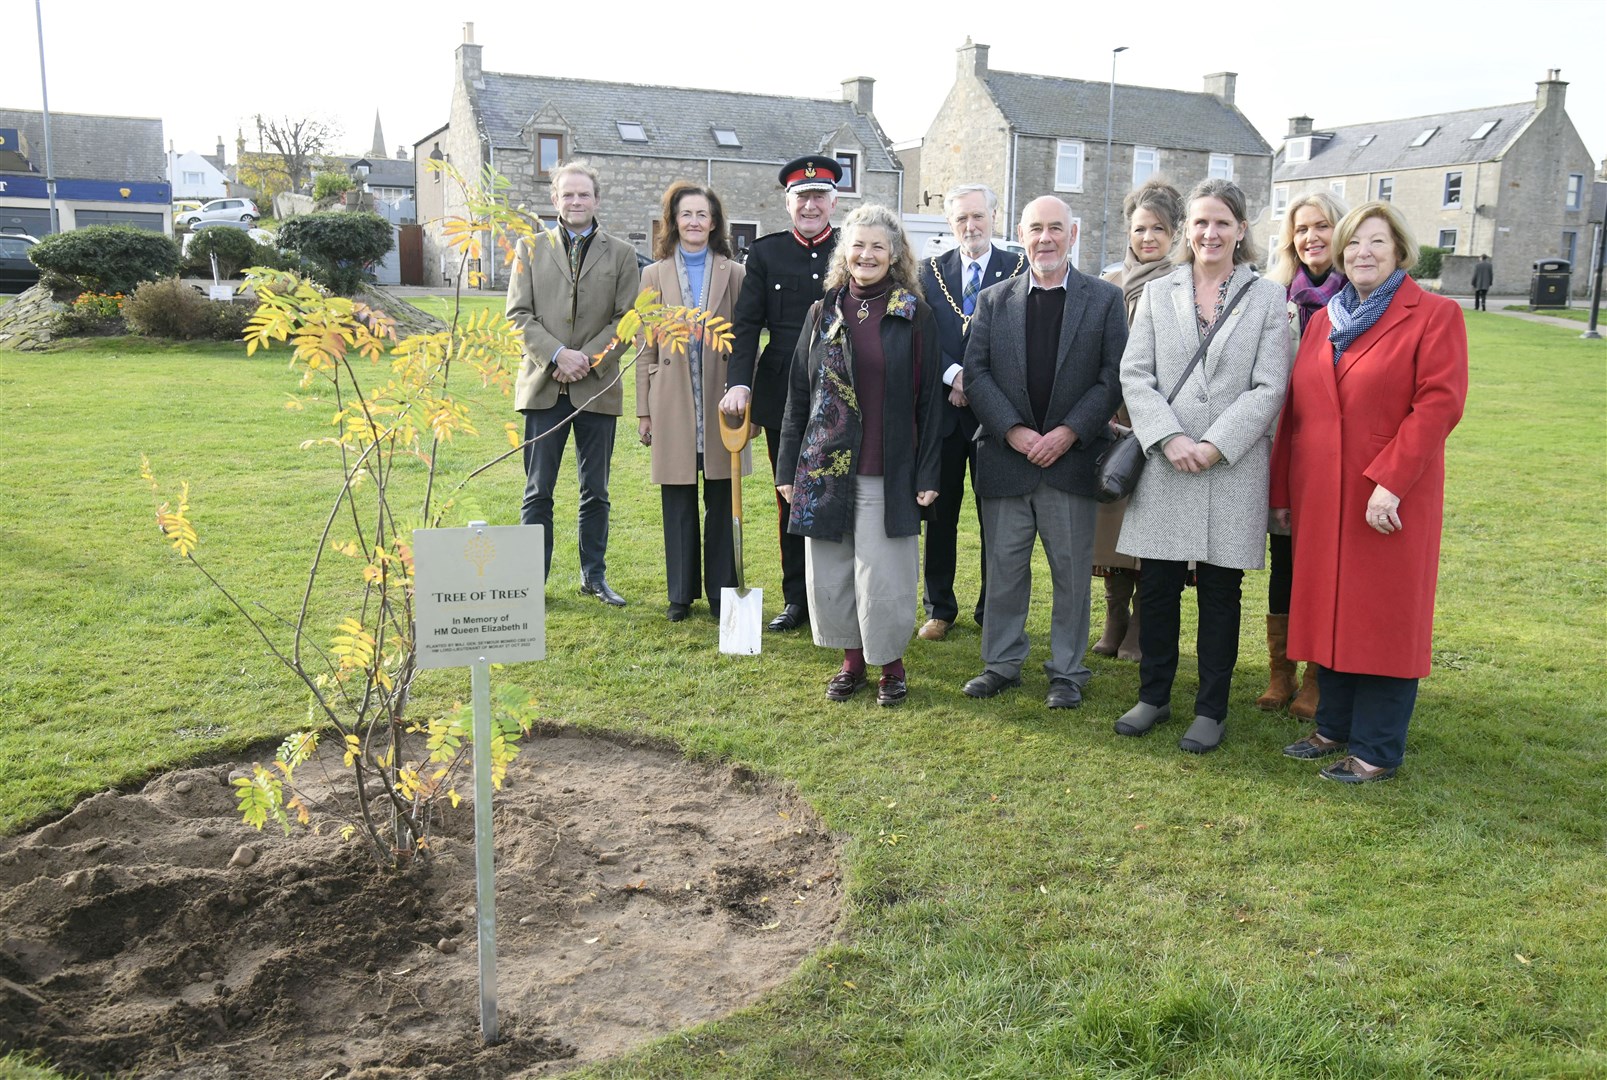 From left: John Stuart, Nancy Robson, Lord Lieutenant Seymour Monro, Helen Moore, John Cowe, George McIntrye, Joan Cowe, Rebecca Russell, Carolle Ralph and Lily Mulholland with the "Tree of Trees". Picture: Beth Taylor